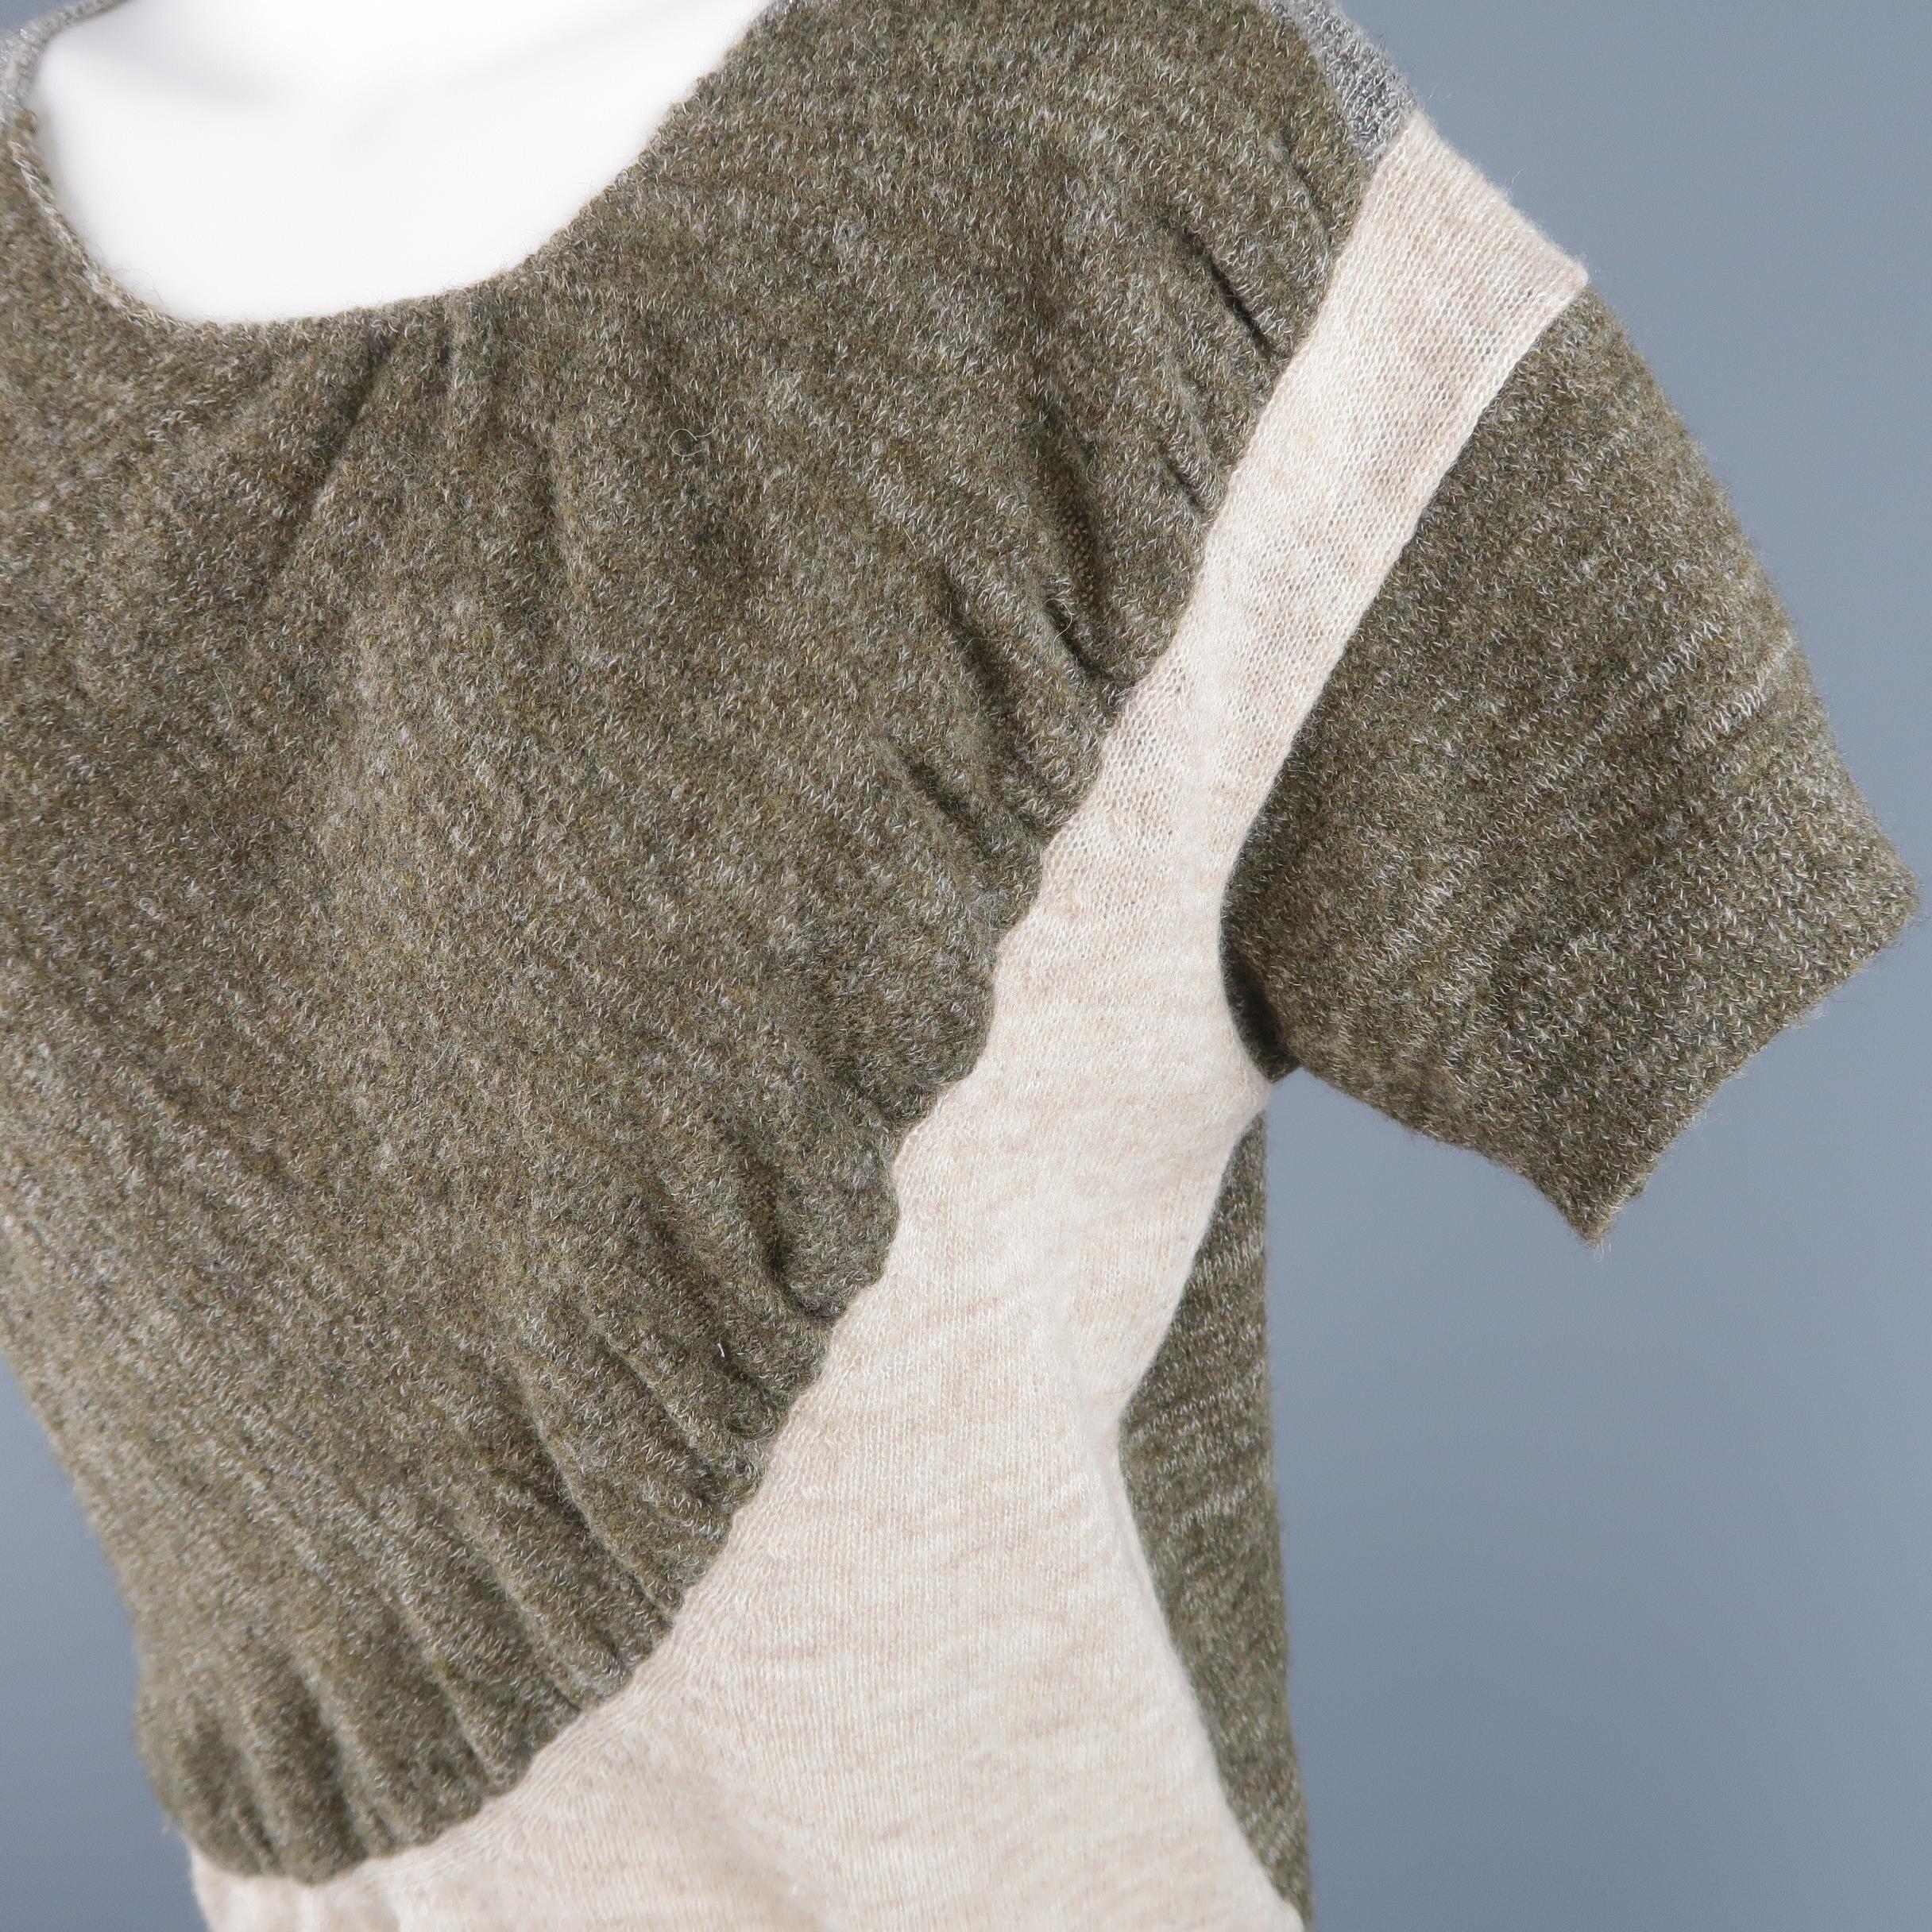 DRIES VAN NOTEN pullover features panels of heathered olive green, beige, and silver metallic wool blend knit. Made in Belgium.
 
Excellent Pre-Owned Condition.
Marked: Small
 
Measurements:
 
Shoulder: 16 in.
Bust: 42 in.
Sleeve: 7 in.
Length: 24